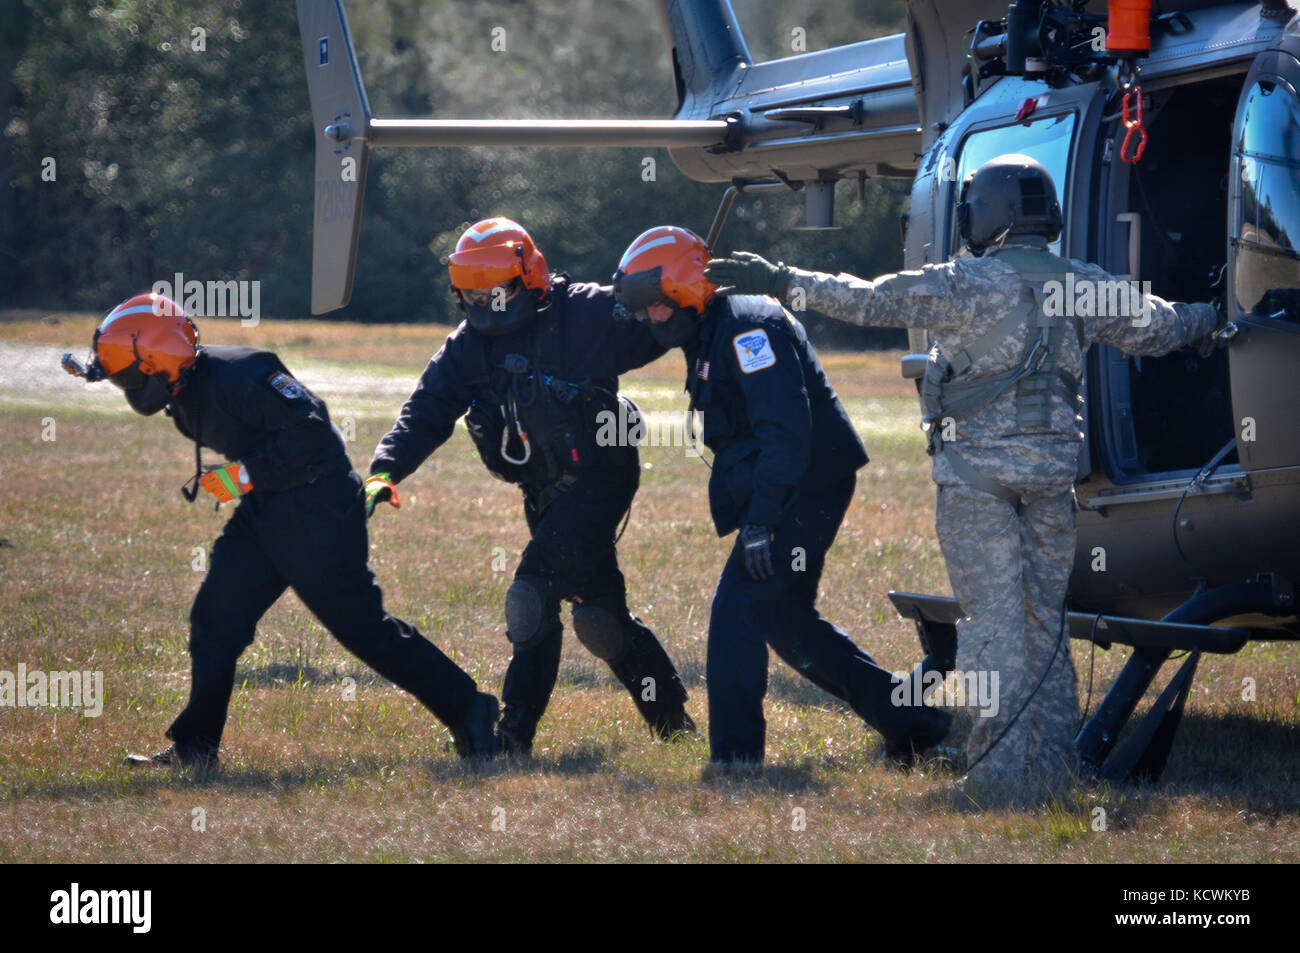 South Carolina National Guard Soldiers, and fire department/EMS rescuers with the S.C. Helicopter Aquatic Rescue Team (SC-HART) program, S.C. Urban Search and Rescue Task Force 1 (SC-TF1), perform hoist-training operations during the preliminary phases of âPatriot South Exercise 2017â (Patriot South 17), a joint training-exercise focused on natural disaster-response and preparedness, Gulfport and Port Bienville Industrial Complex (PBIC), Mississippi, Jan. 29, 2017. Patriot South 17 is taking place at multiple locations across Mississippi, from January 23 through February 7, 2017, and it offers Stock Photo